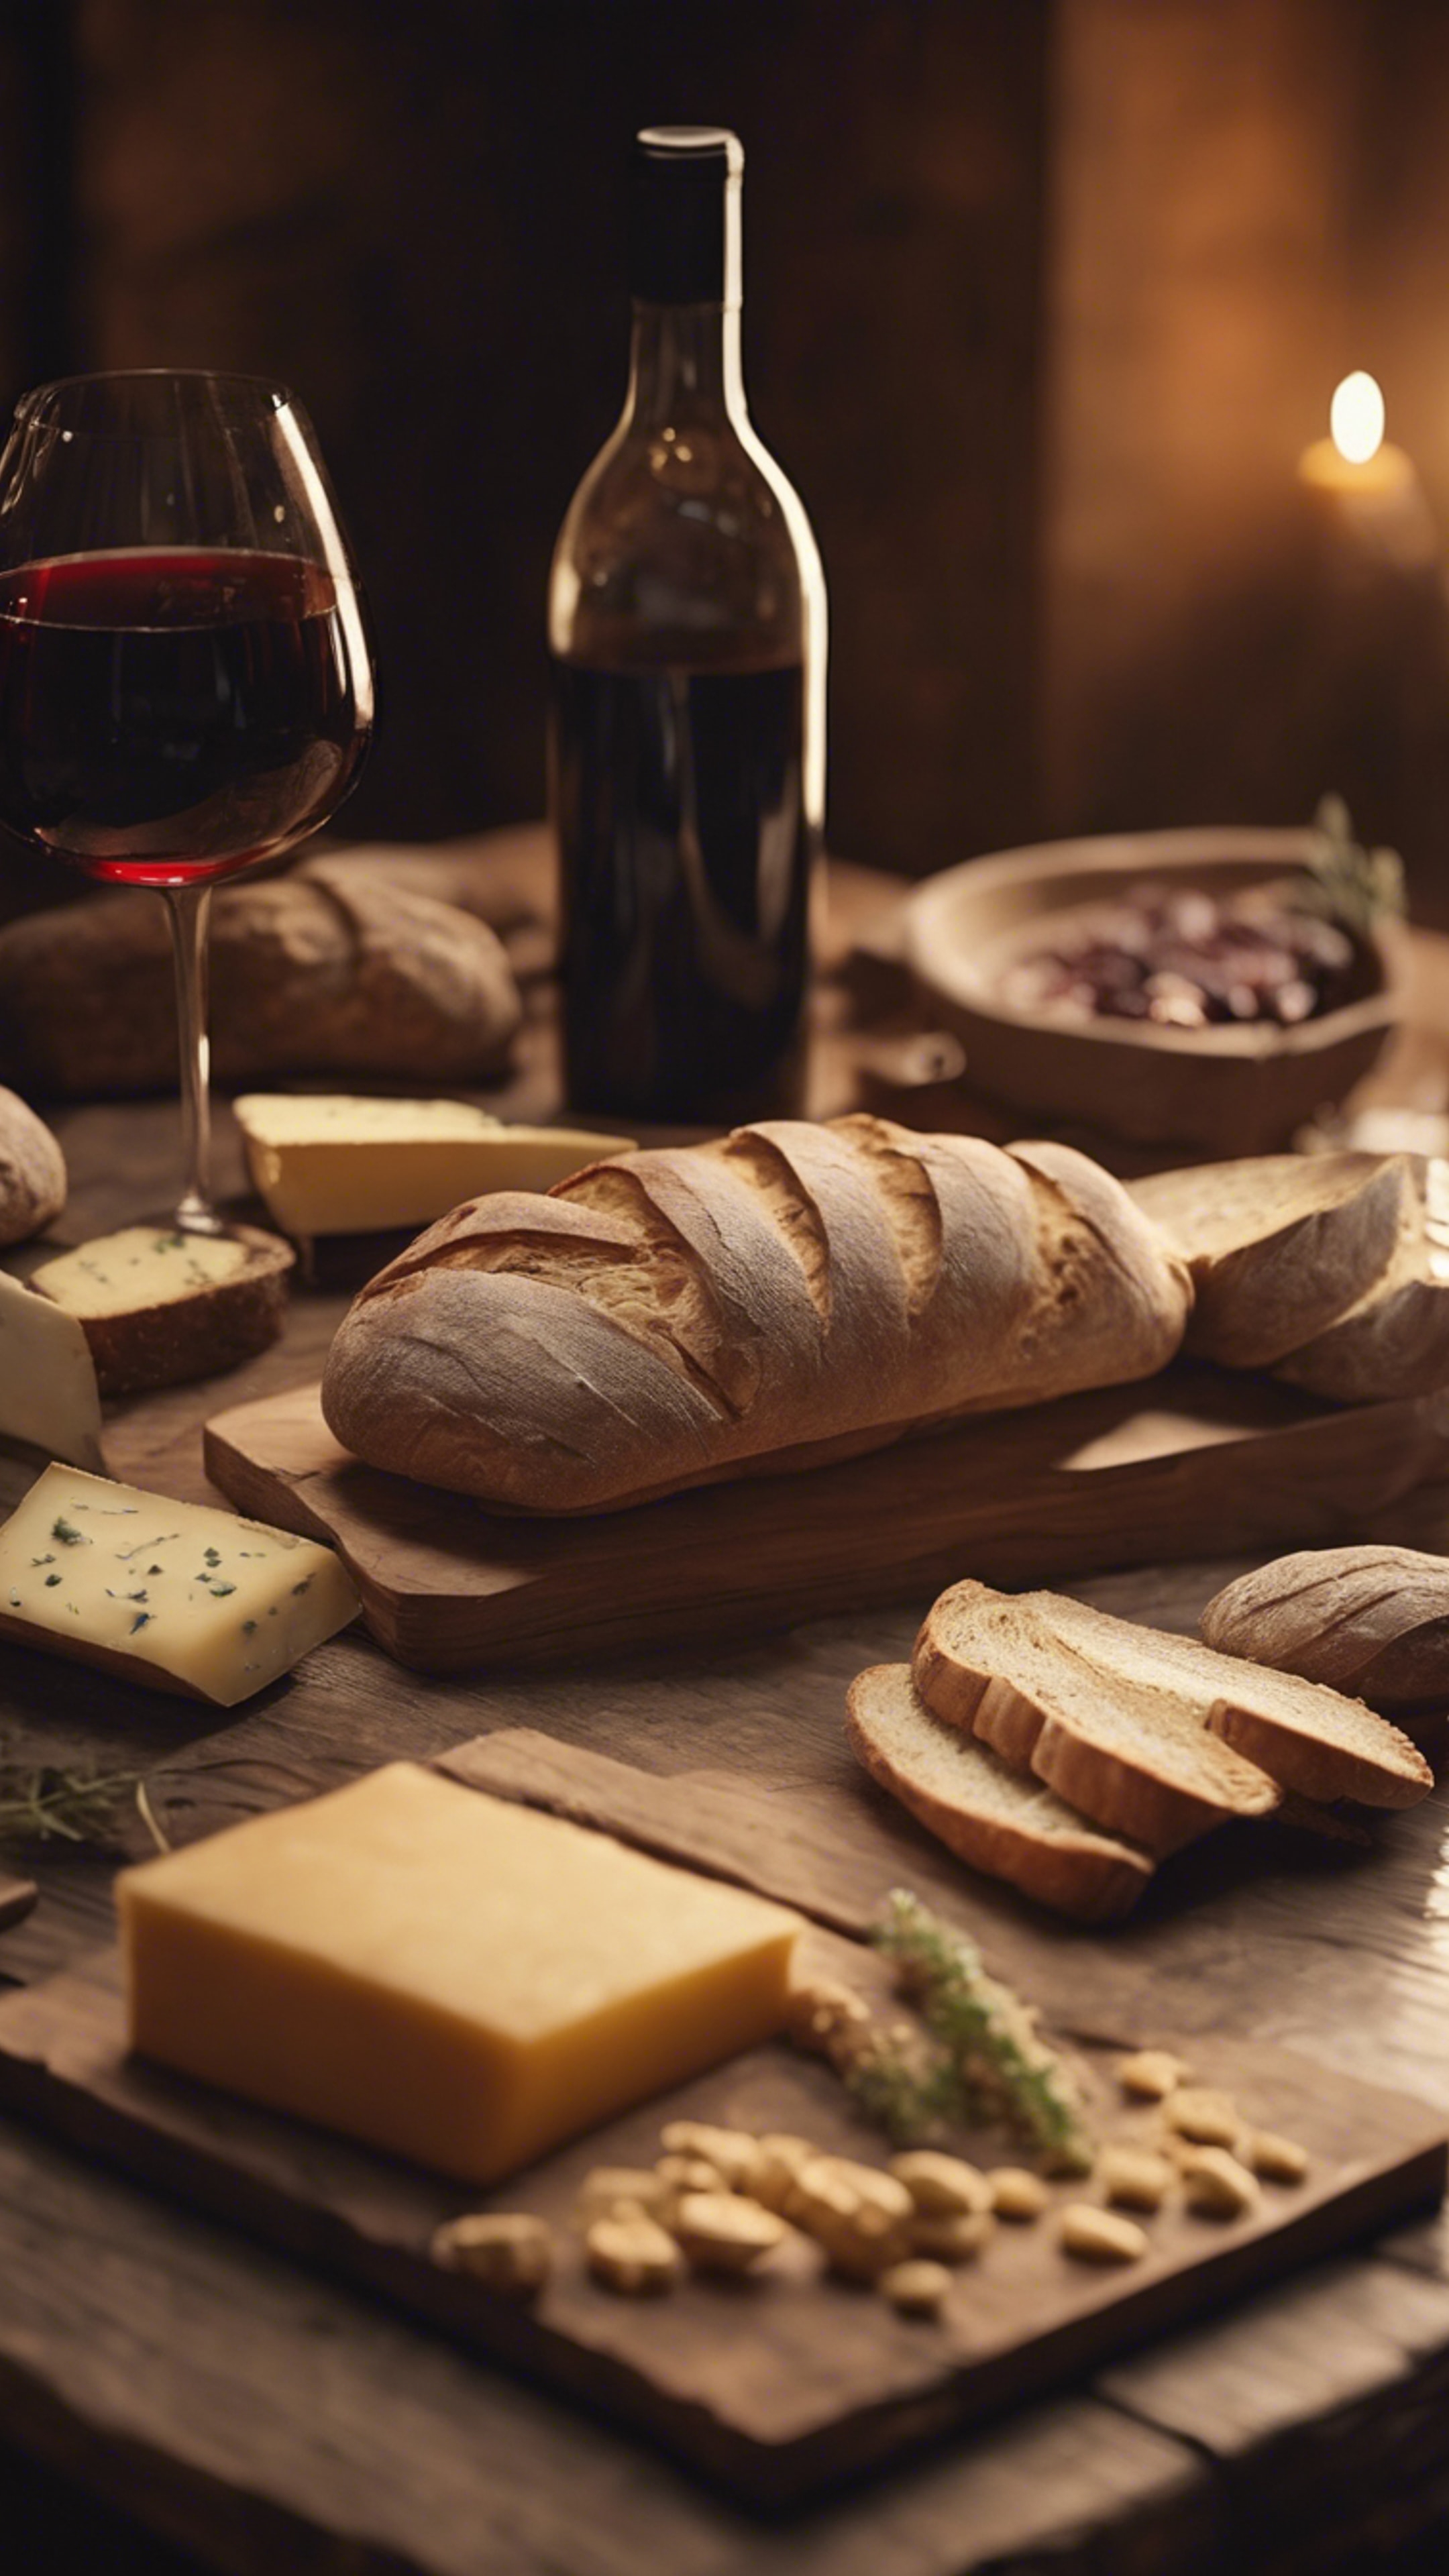 Detailed close-up of a rustic French country-style wooden table set with fresh bread, wine, and cheese under warm interior lighting. Sfondo[6a74bb7d88b74d998281]